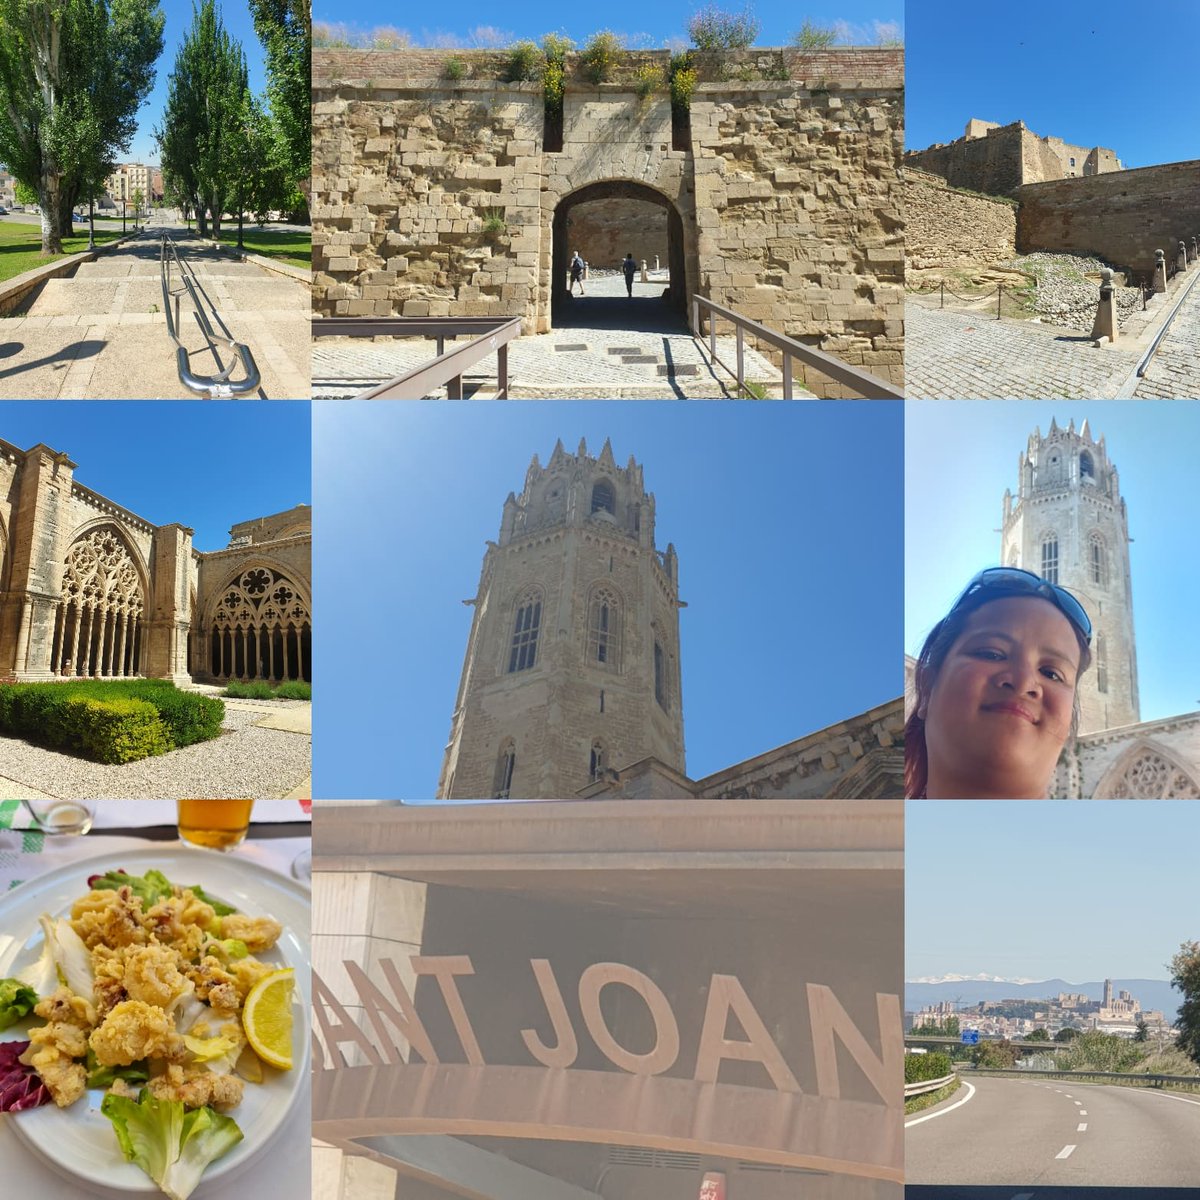 Lleida a beautiful city with an old cathedrale, a palace and picturesque shopping streets. 
#MypeakChallenge 
#Lleida 
#Spain 
#Holidayvibes